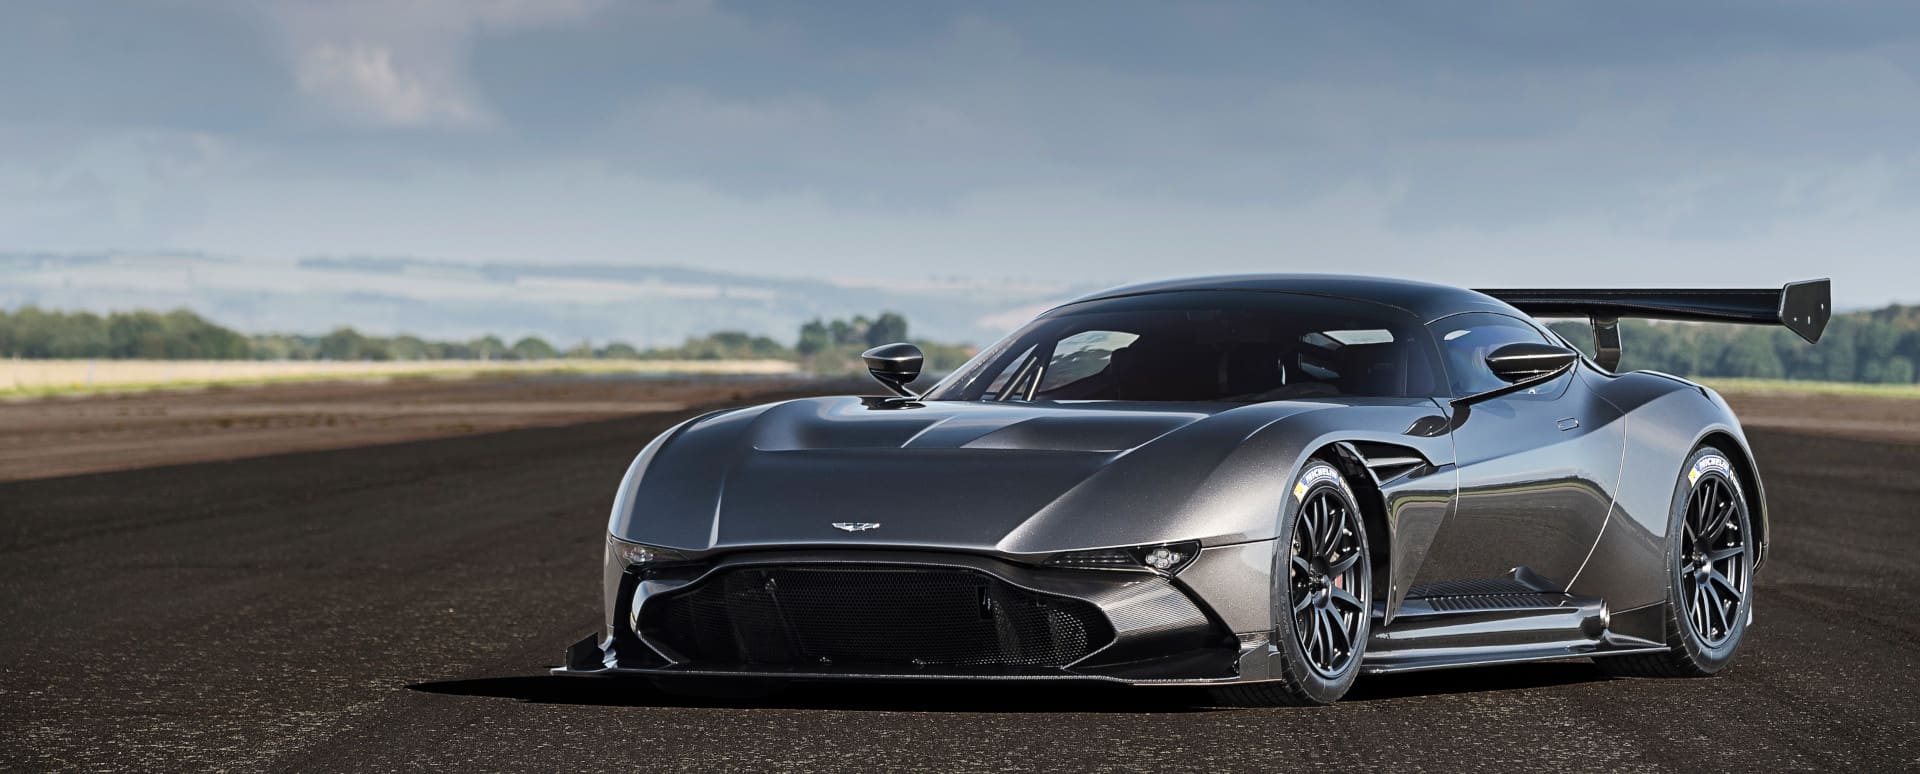 Aston Martin Vulcan Exterior Front Static in the Middle of a Runway